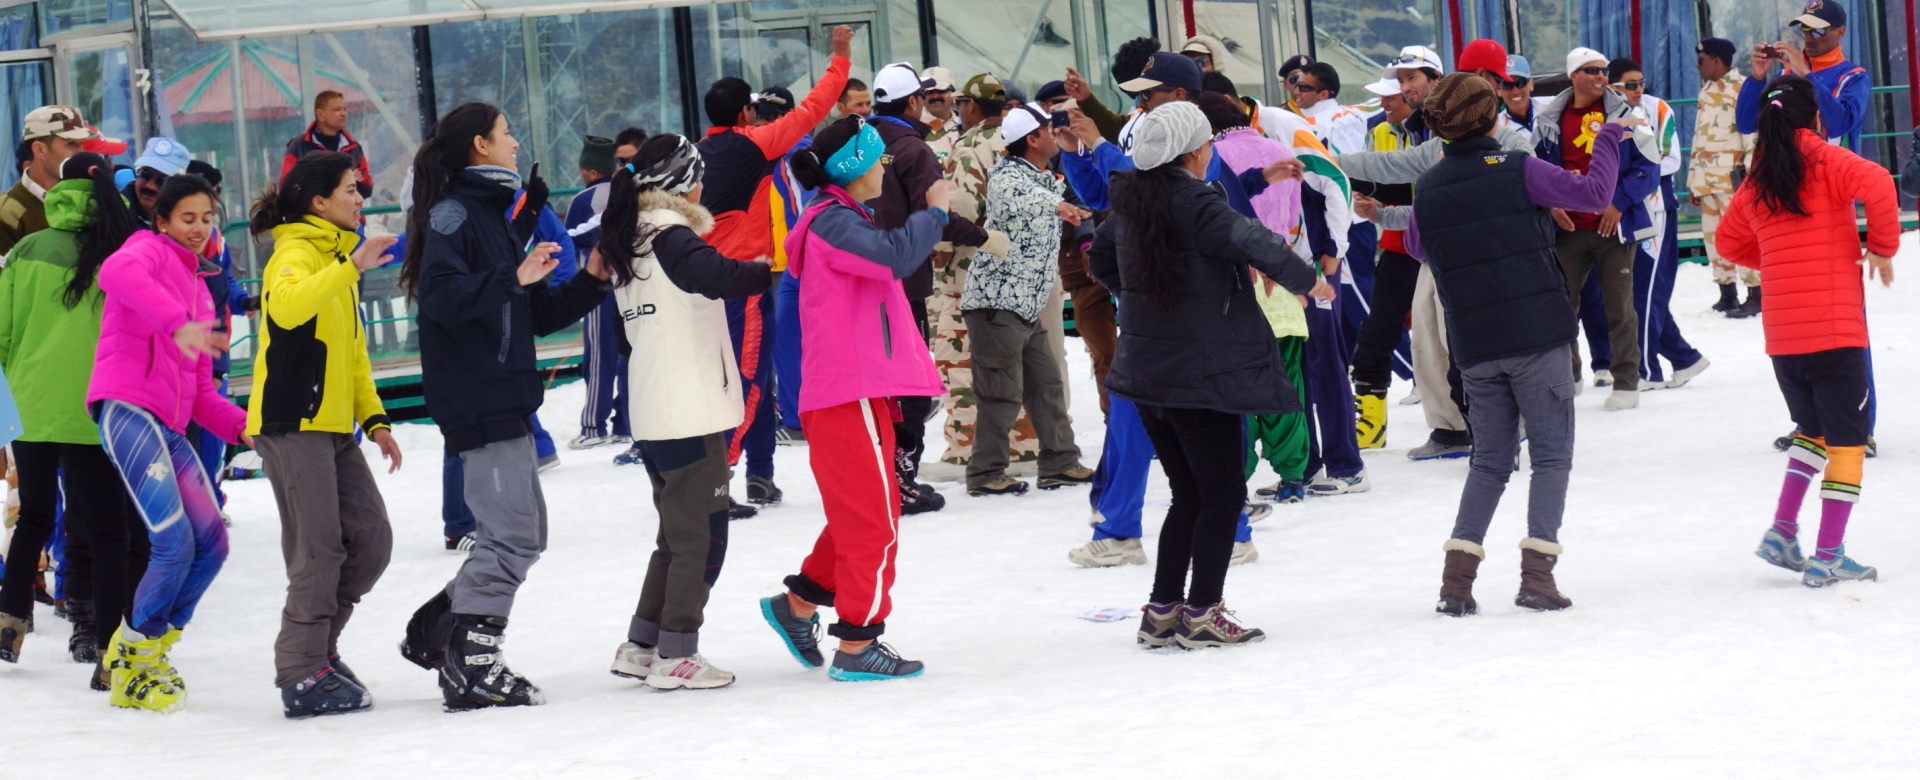 auli-skiing-tour-package